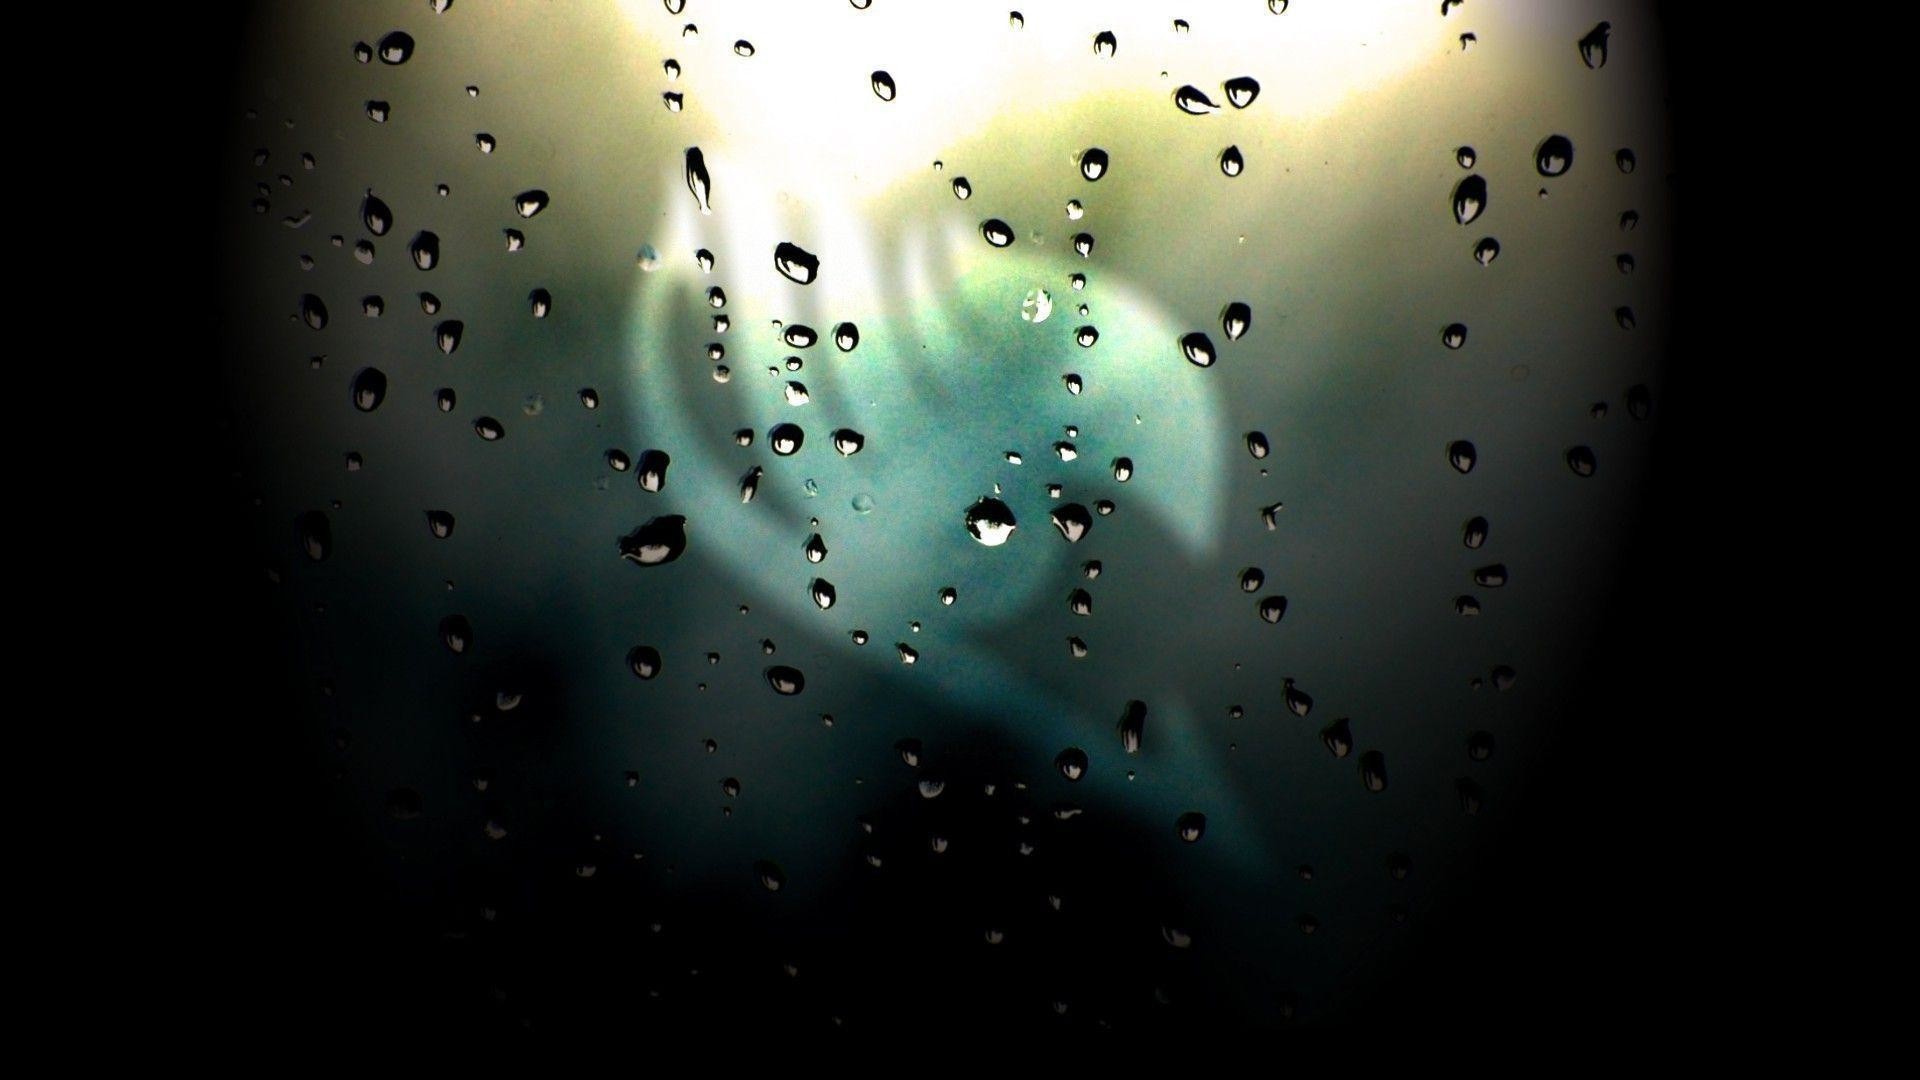 1920x1080 Wallpapers For > Raindrops Wallpaper Android